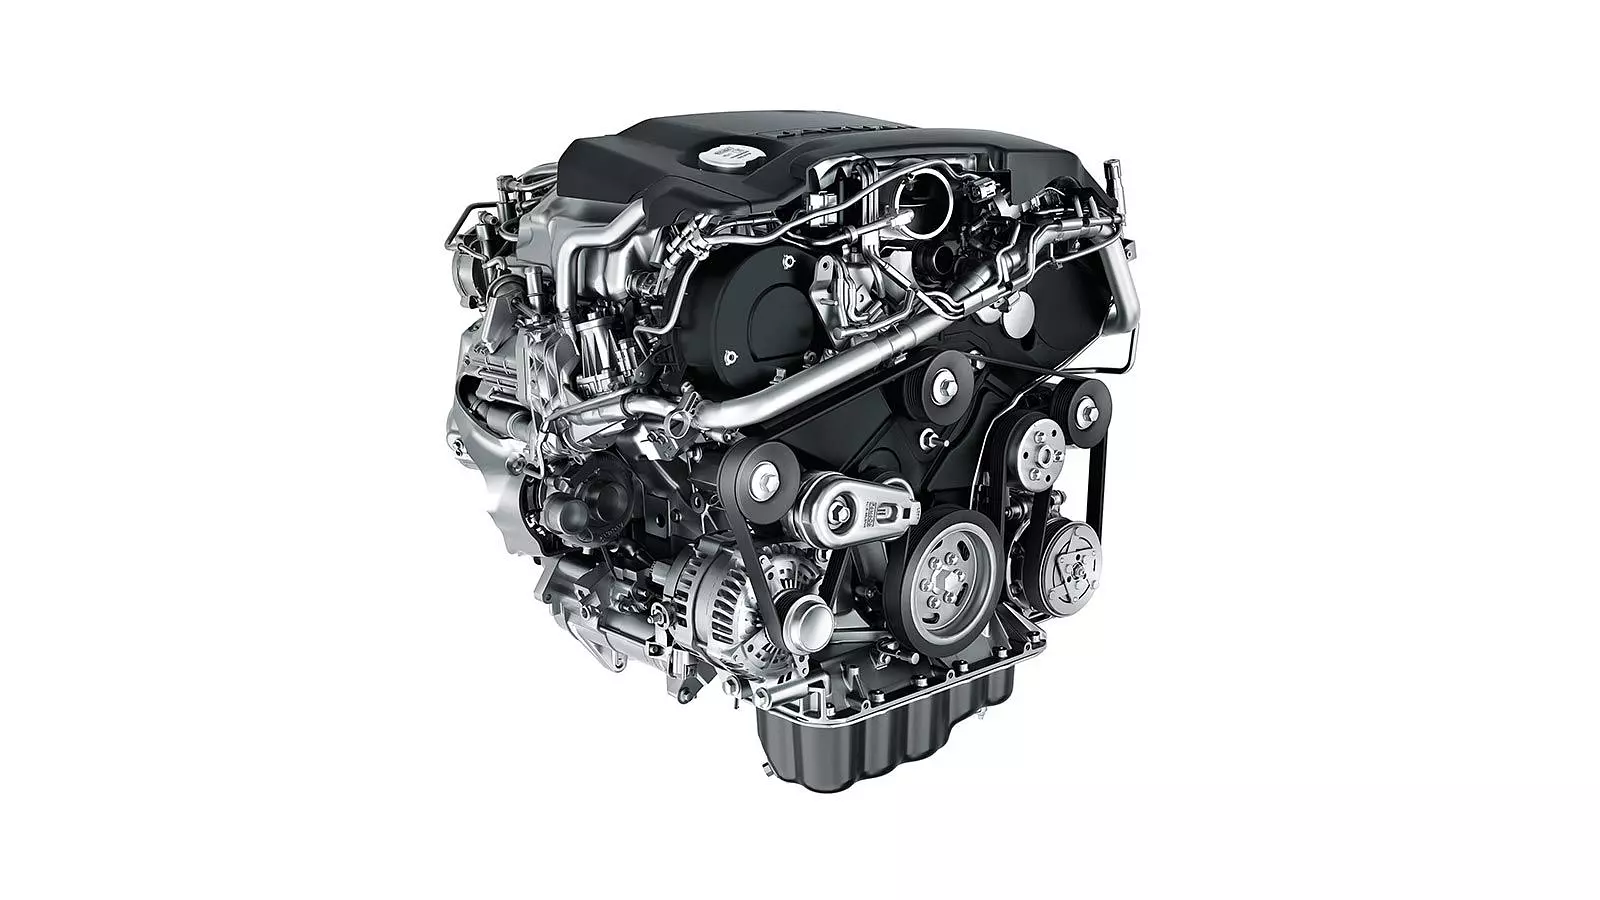 DIESEL OR PETROL ENGINES: WHAT YOU NEED TO KNOW